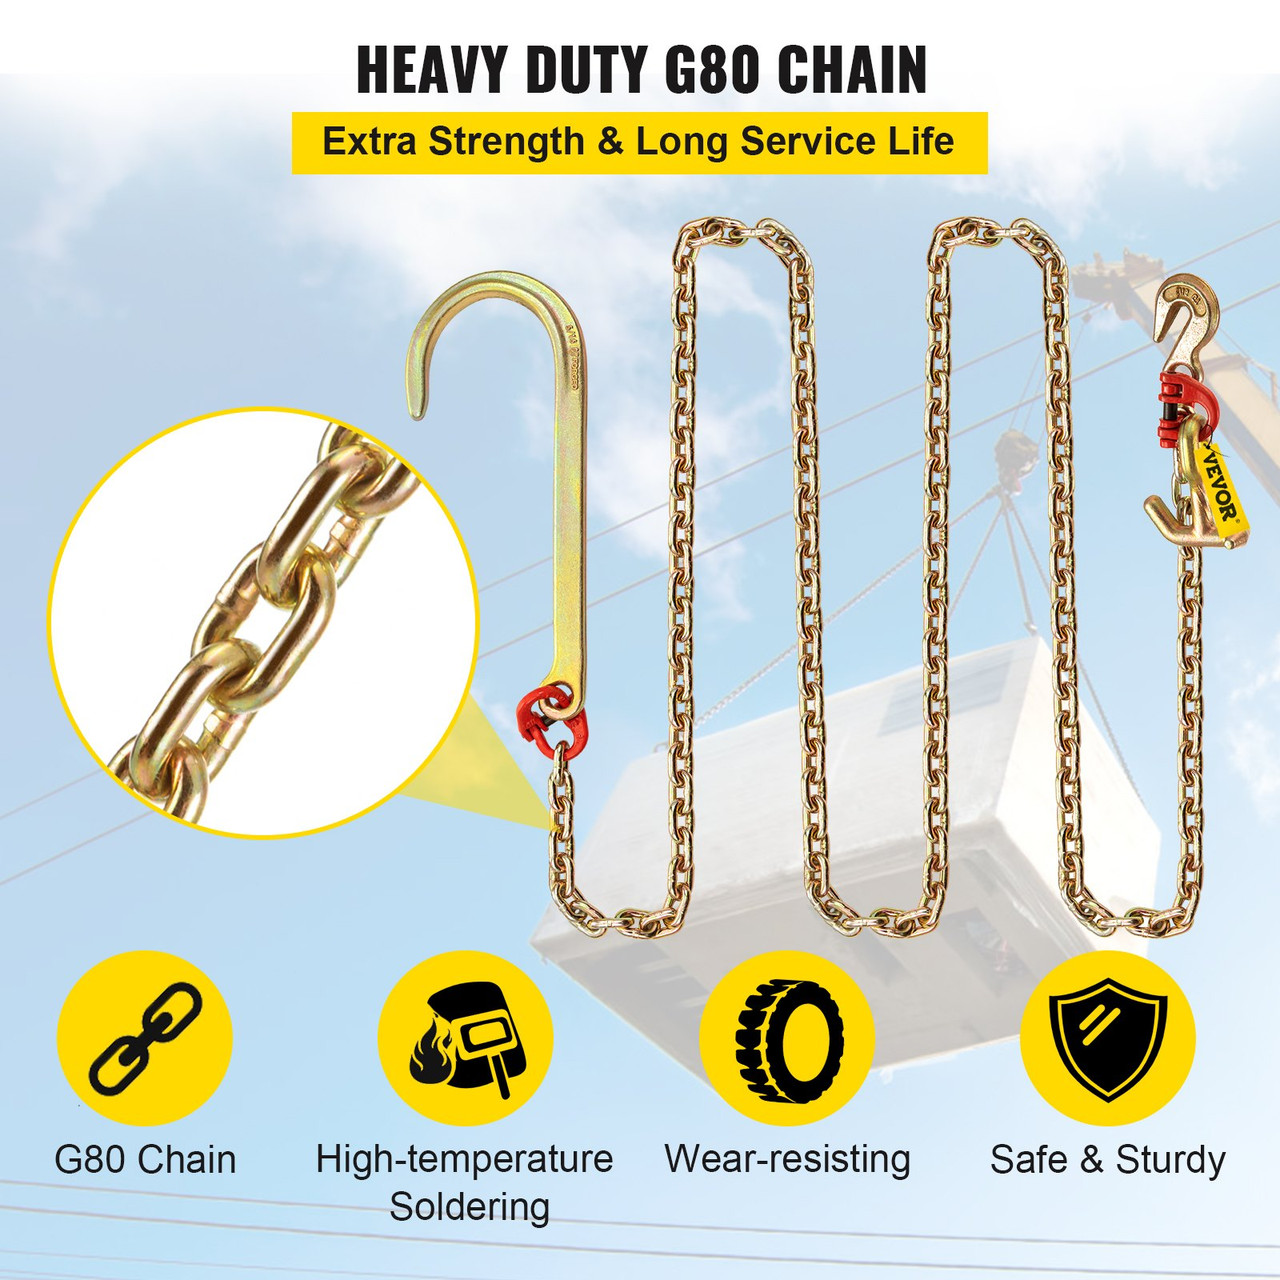 J Hook Chain, 5/16 in x 10 ft Tow Chain Bridle, Grade 80 J Hook Transport Chain, 9260 Lbs Break Strength with JT Hook & Grab Hook, Tow Hooks for Trucks, Heavy Duty J Hook and Chain Shorteners